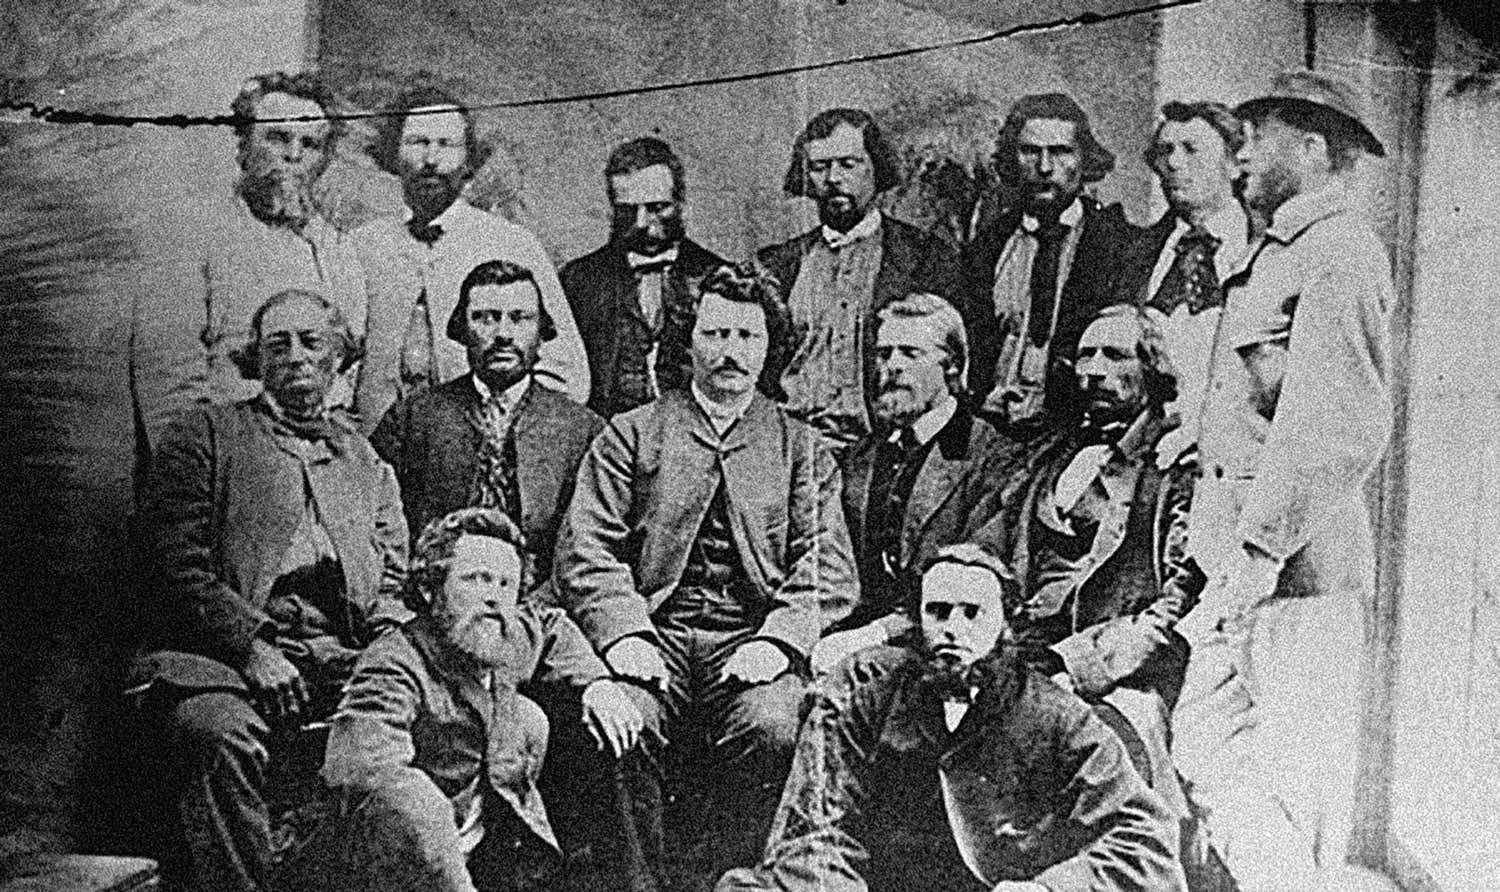 Rows of men from the provisional Metis government posing for a group photo. Louis Riel is in the centre.